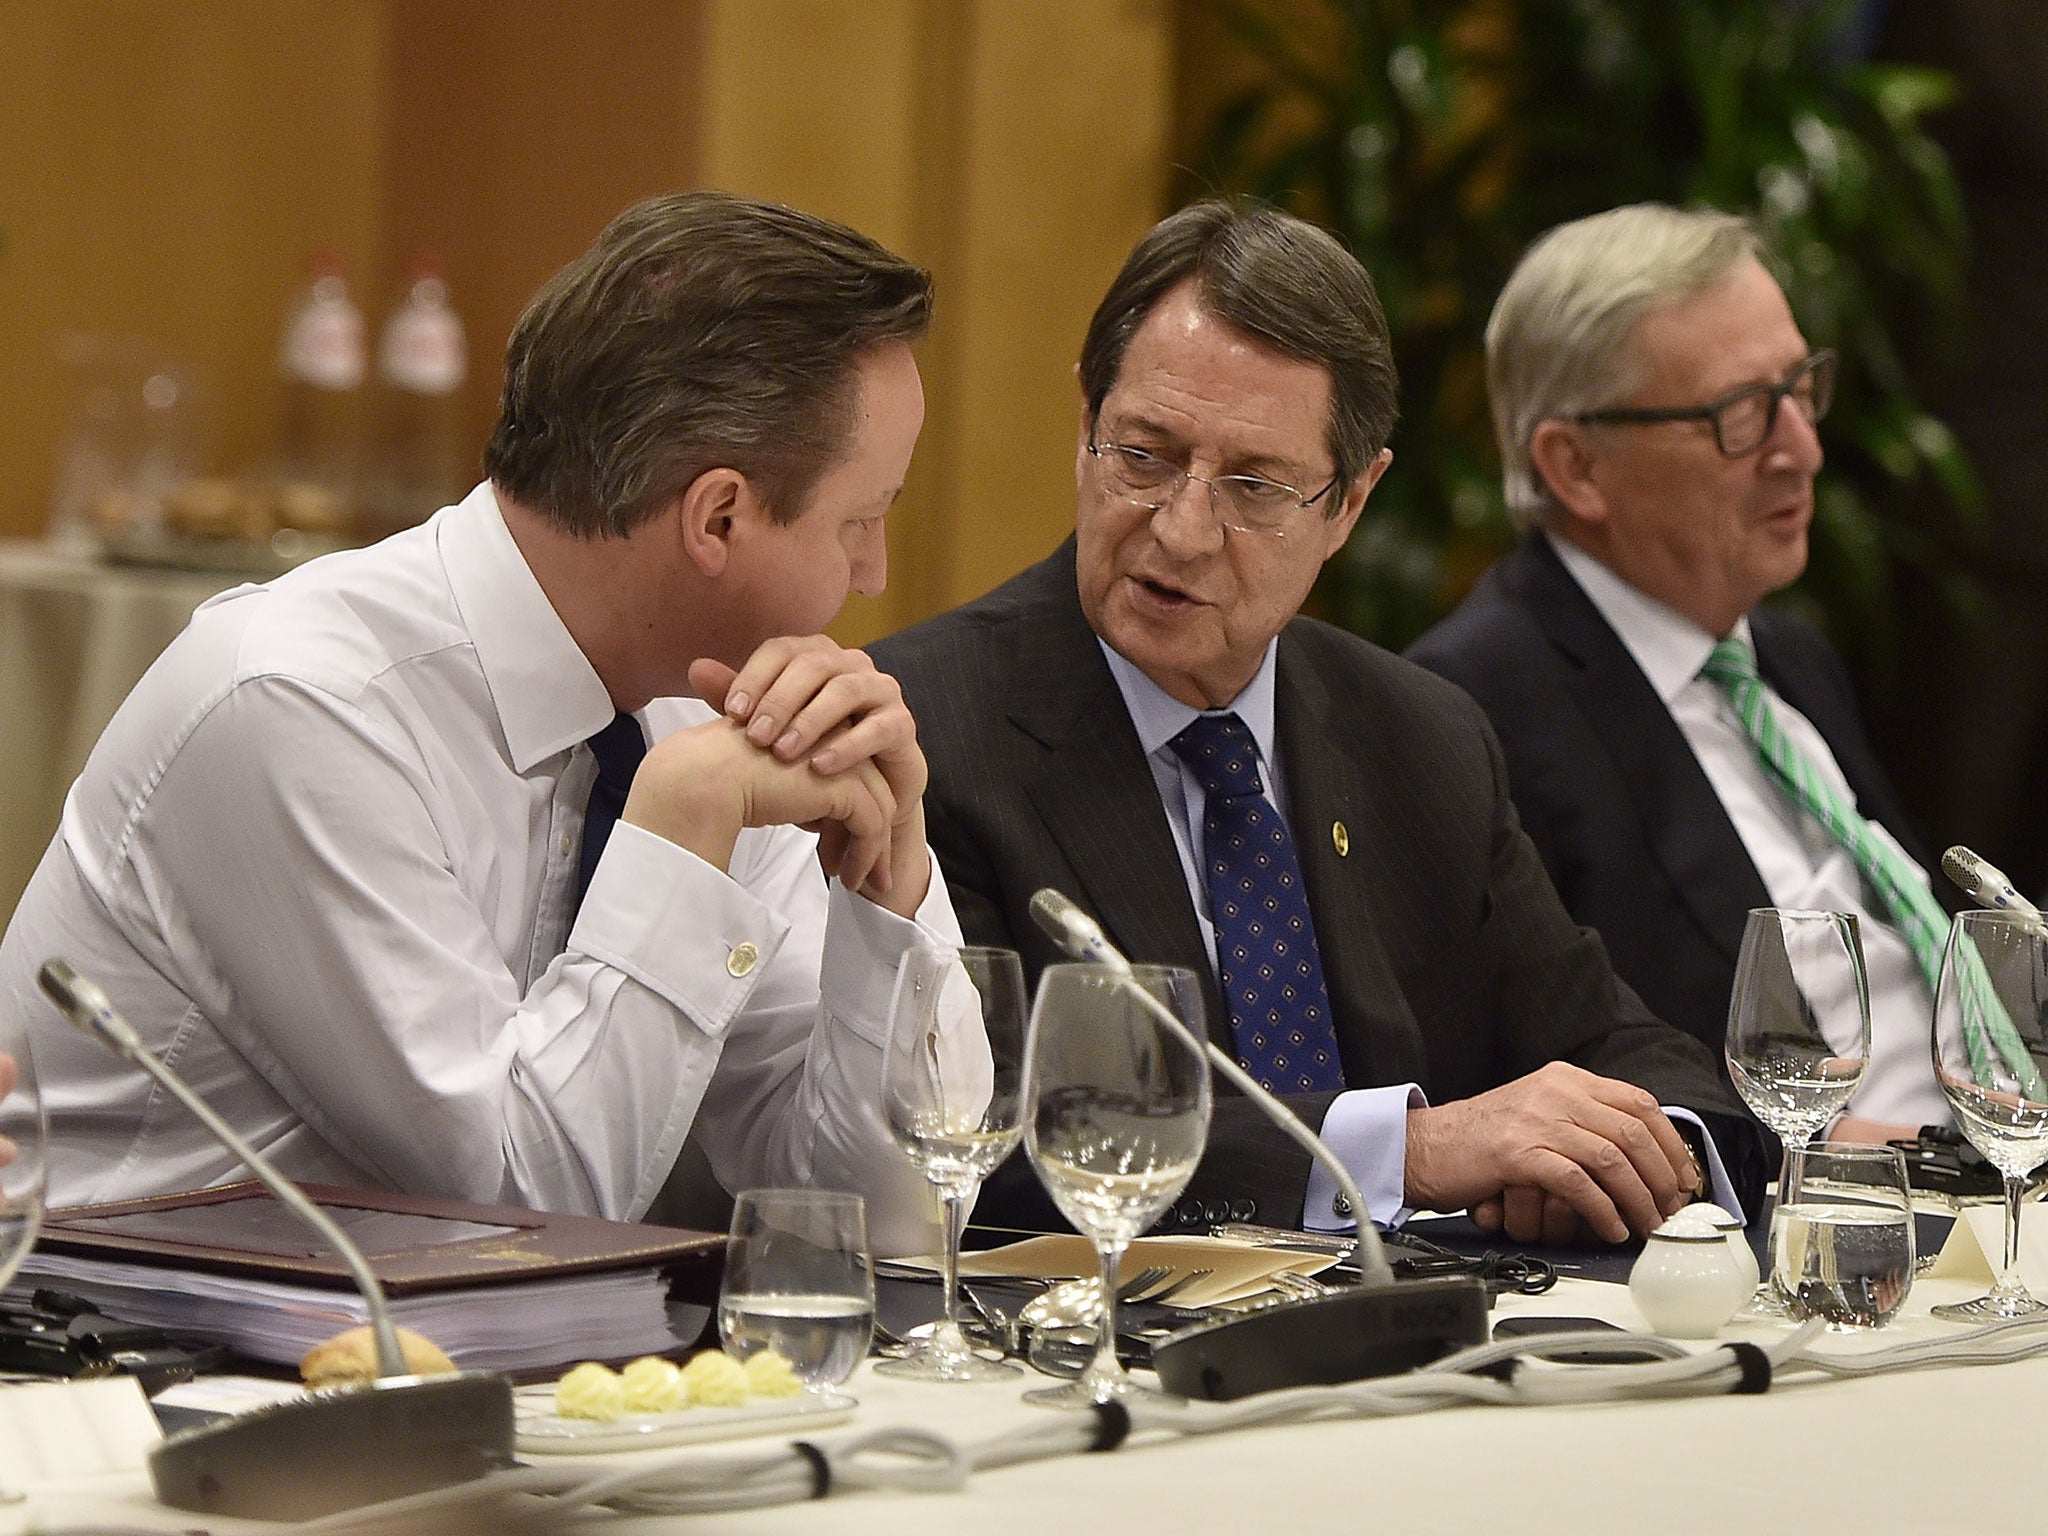 David Cameron discusses details with Cypriot President Nicos Anastasiades and European Commission President Jean-Claude Juncker